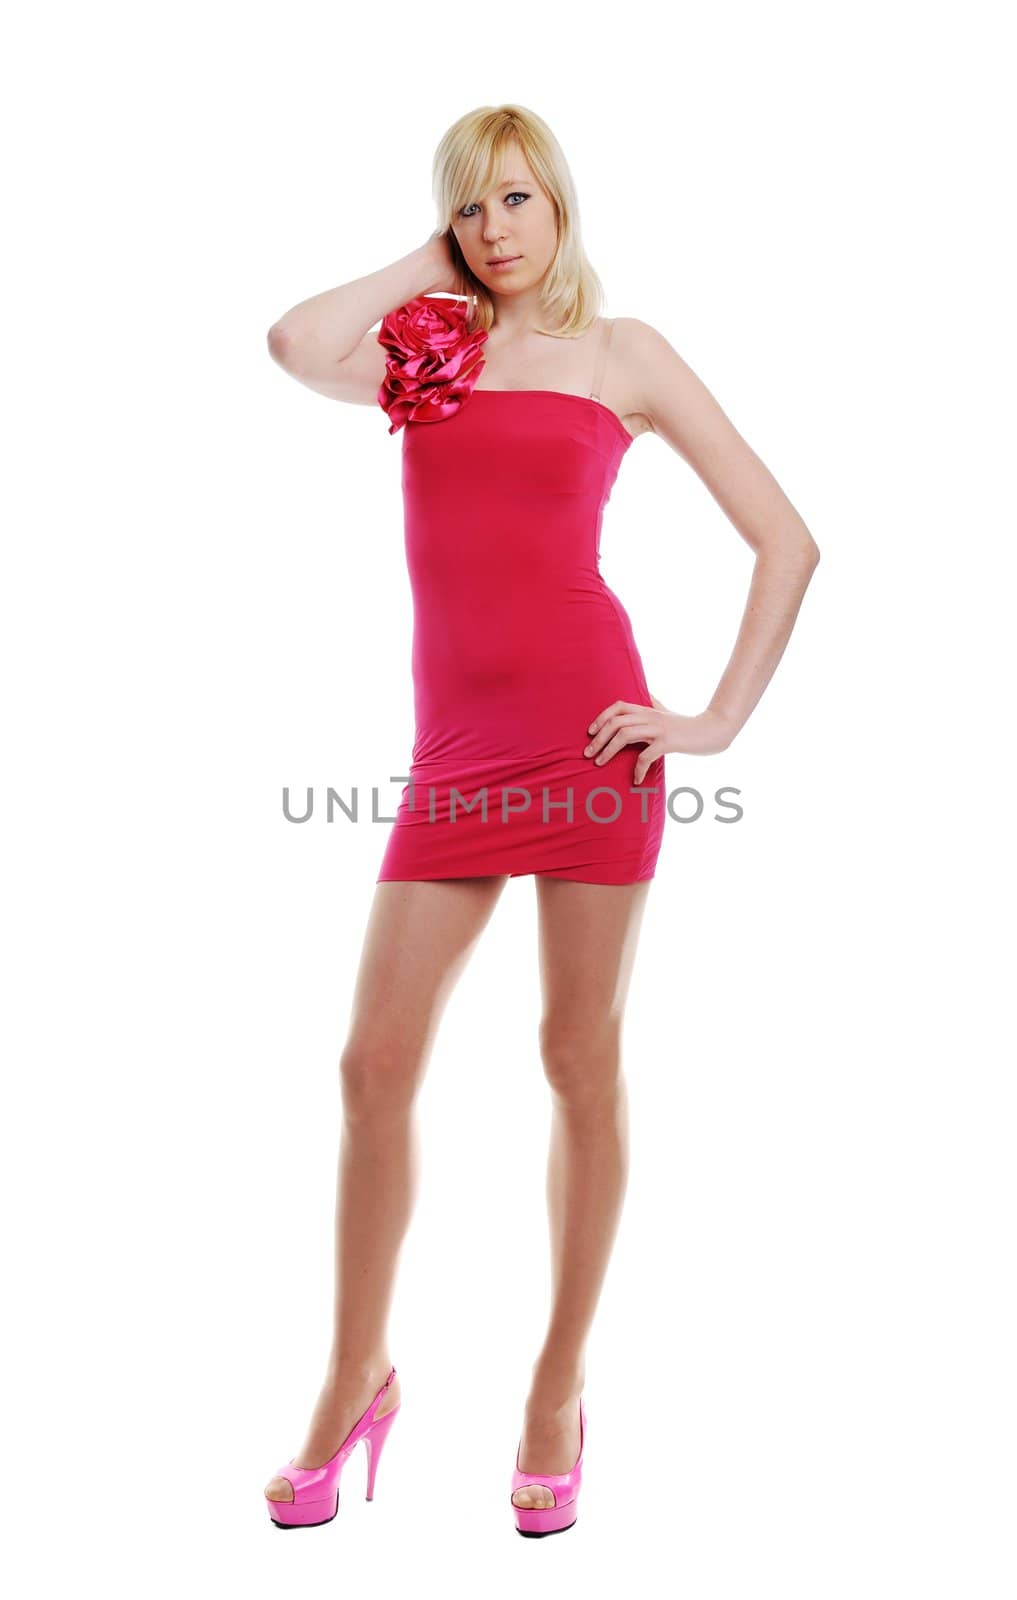 An image of a nice woman in a pink dress